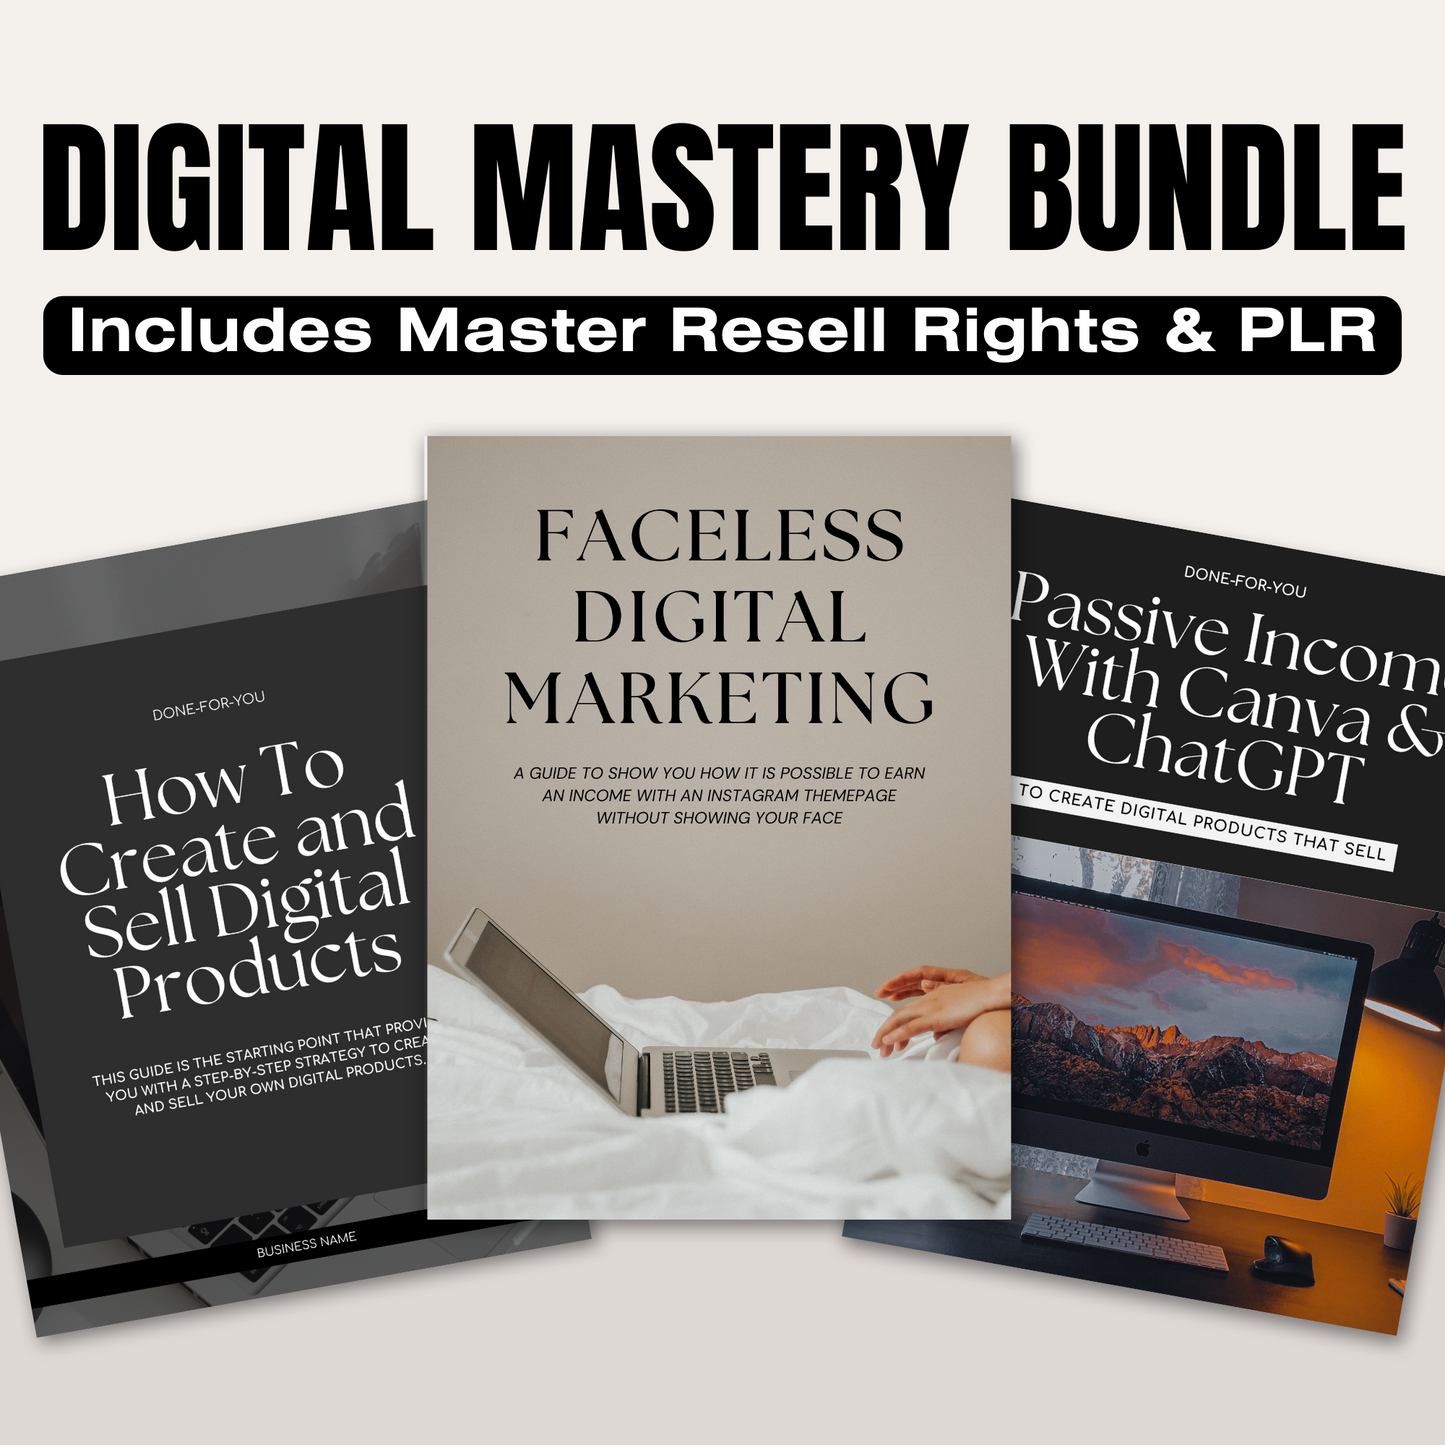 Digital Mastery Bundle With Resell Rights